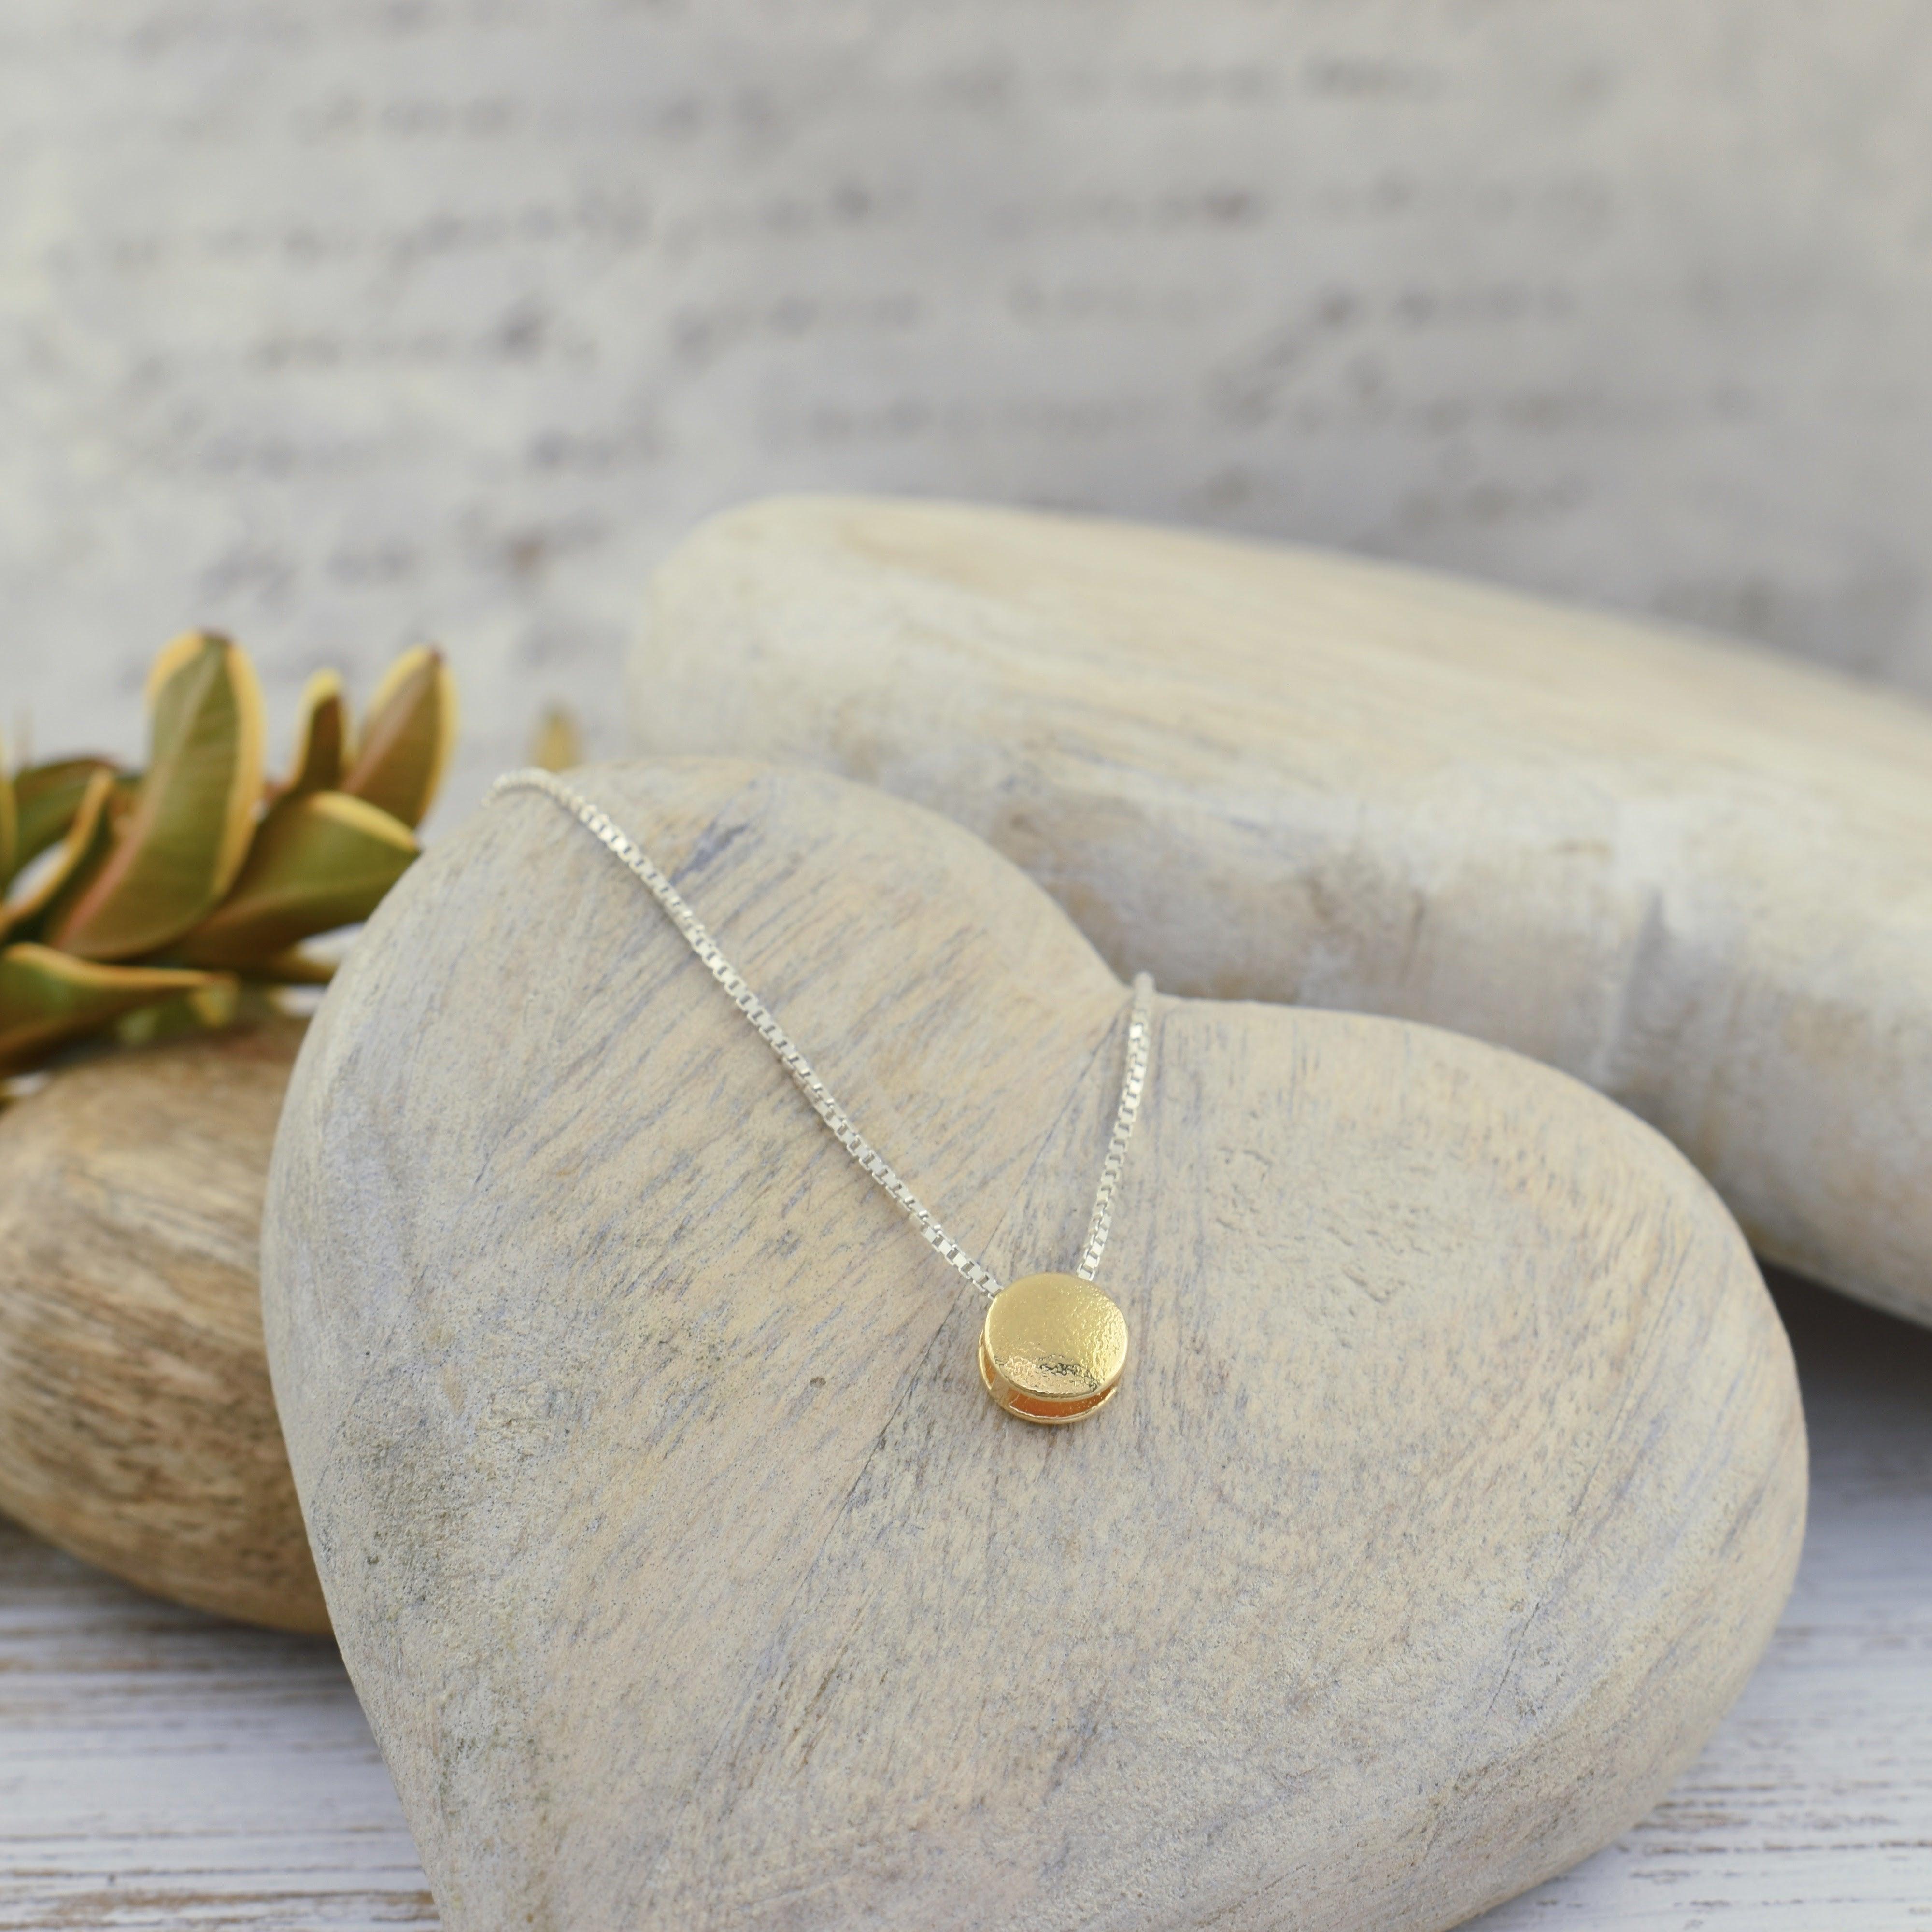 .925 sterling silver necklace with a round gold-filled pendant